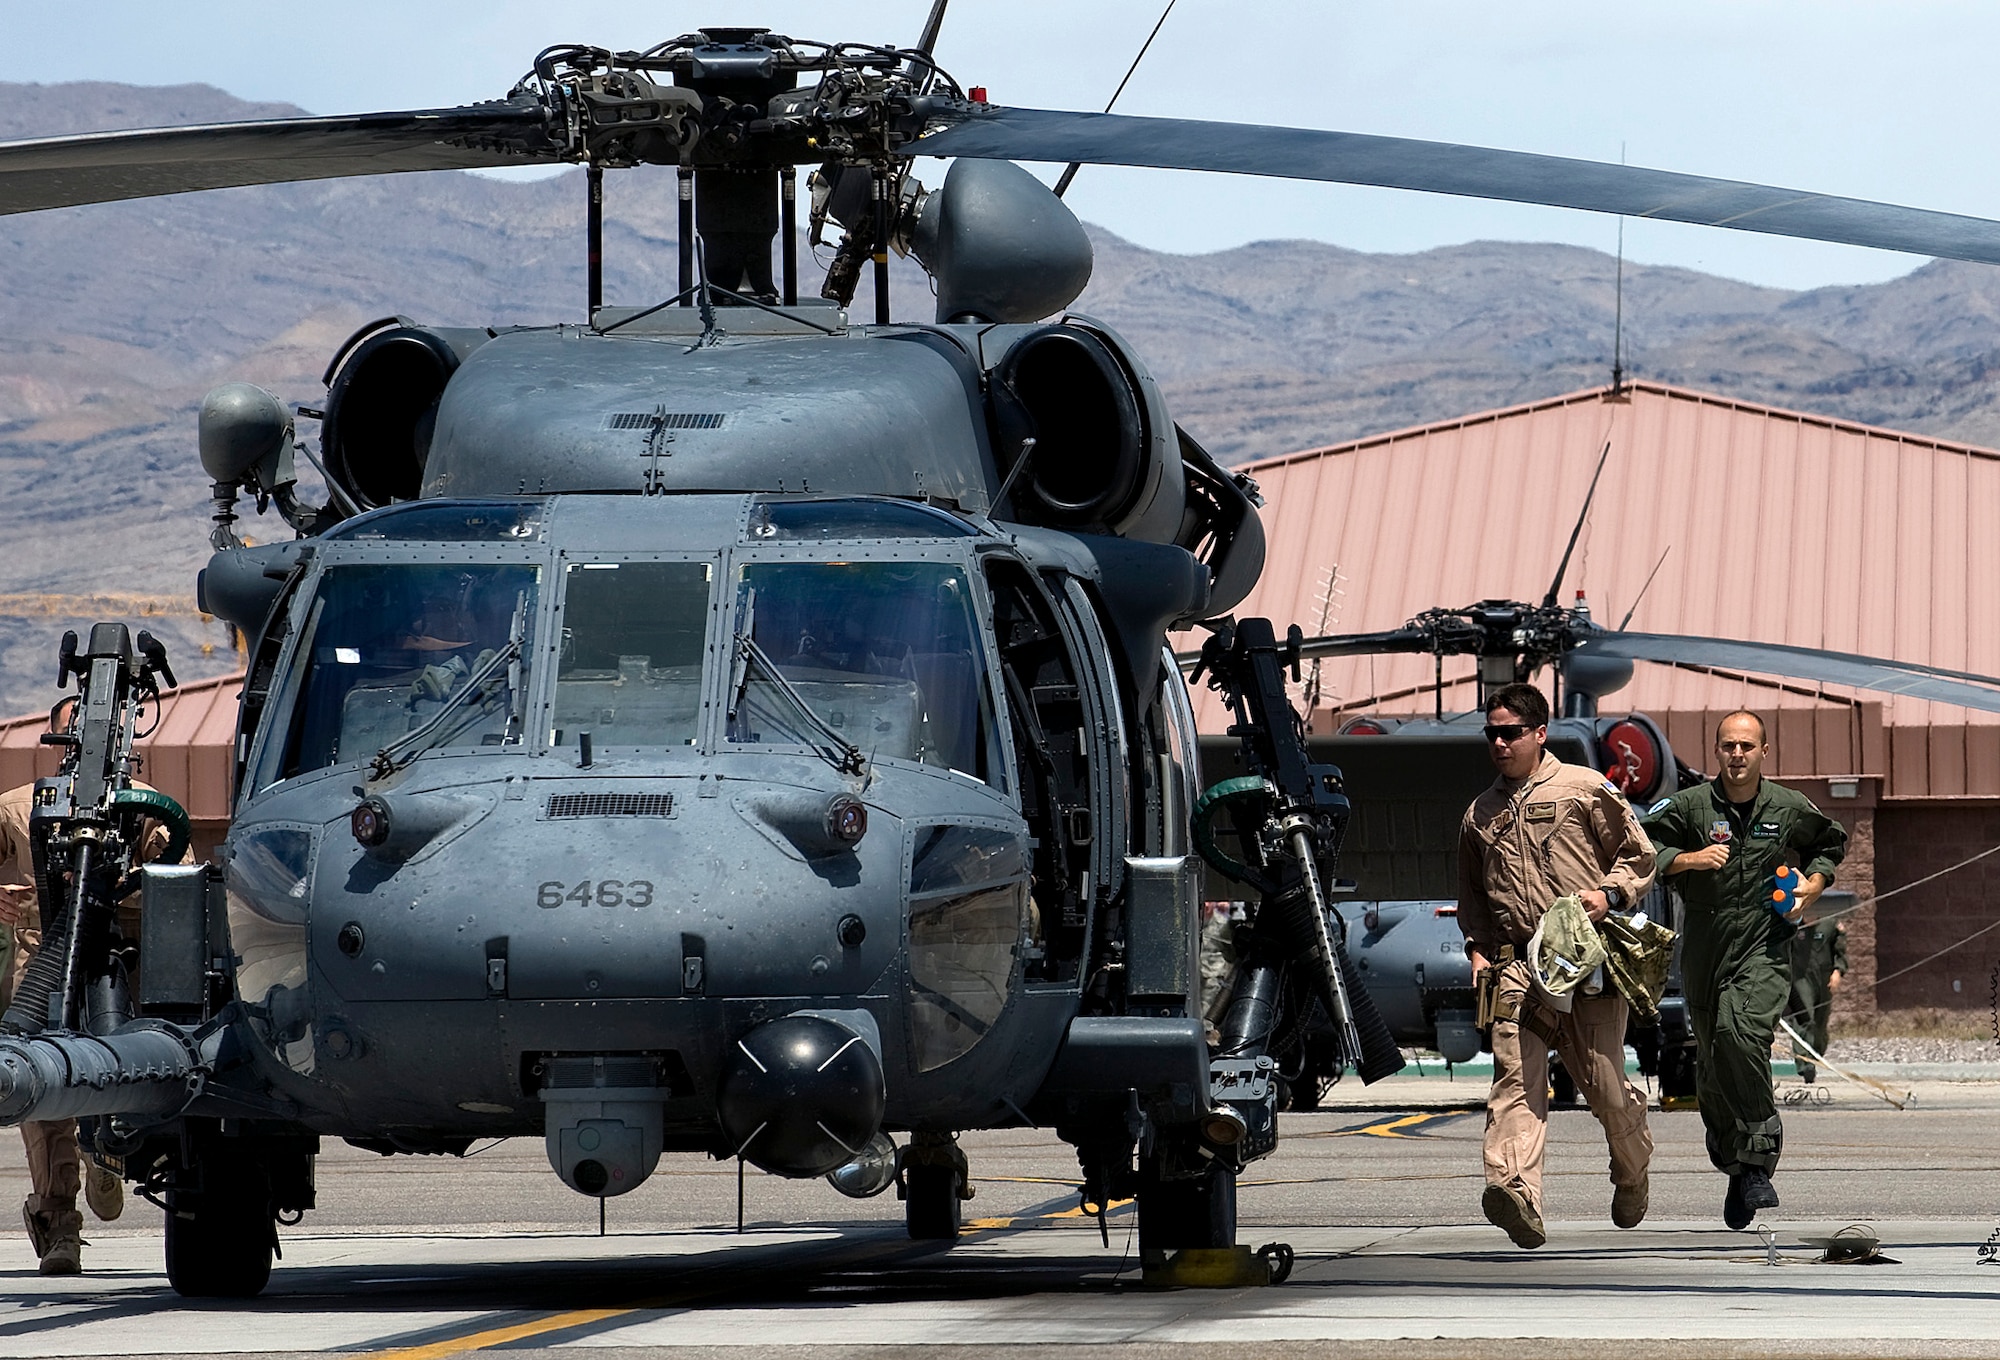 NELLIS AIR FORCE BASE, Nev. -- (left to right) Staff Sgt. Andres Ponce, Pararescueman assigned to the 66th Rescue Squadron, and Staff Sgt. Kevin Darosa, Aerial Gunner assigned to the 66th RQS, run to a HH-60G Pavehawk for a scramble exercise at the Nellis flight line, May 13. The primary mission of the 66th Rescue Squadron is to provide rapidly deployable, expeditionary combat search and rescue forces to theater commanders in response to contingency operations worldwide. (U.S. Air Force Photo by Airman 1st Class Brett Clashman)